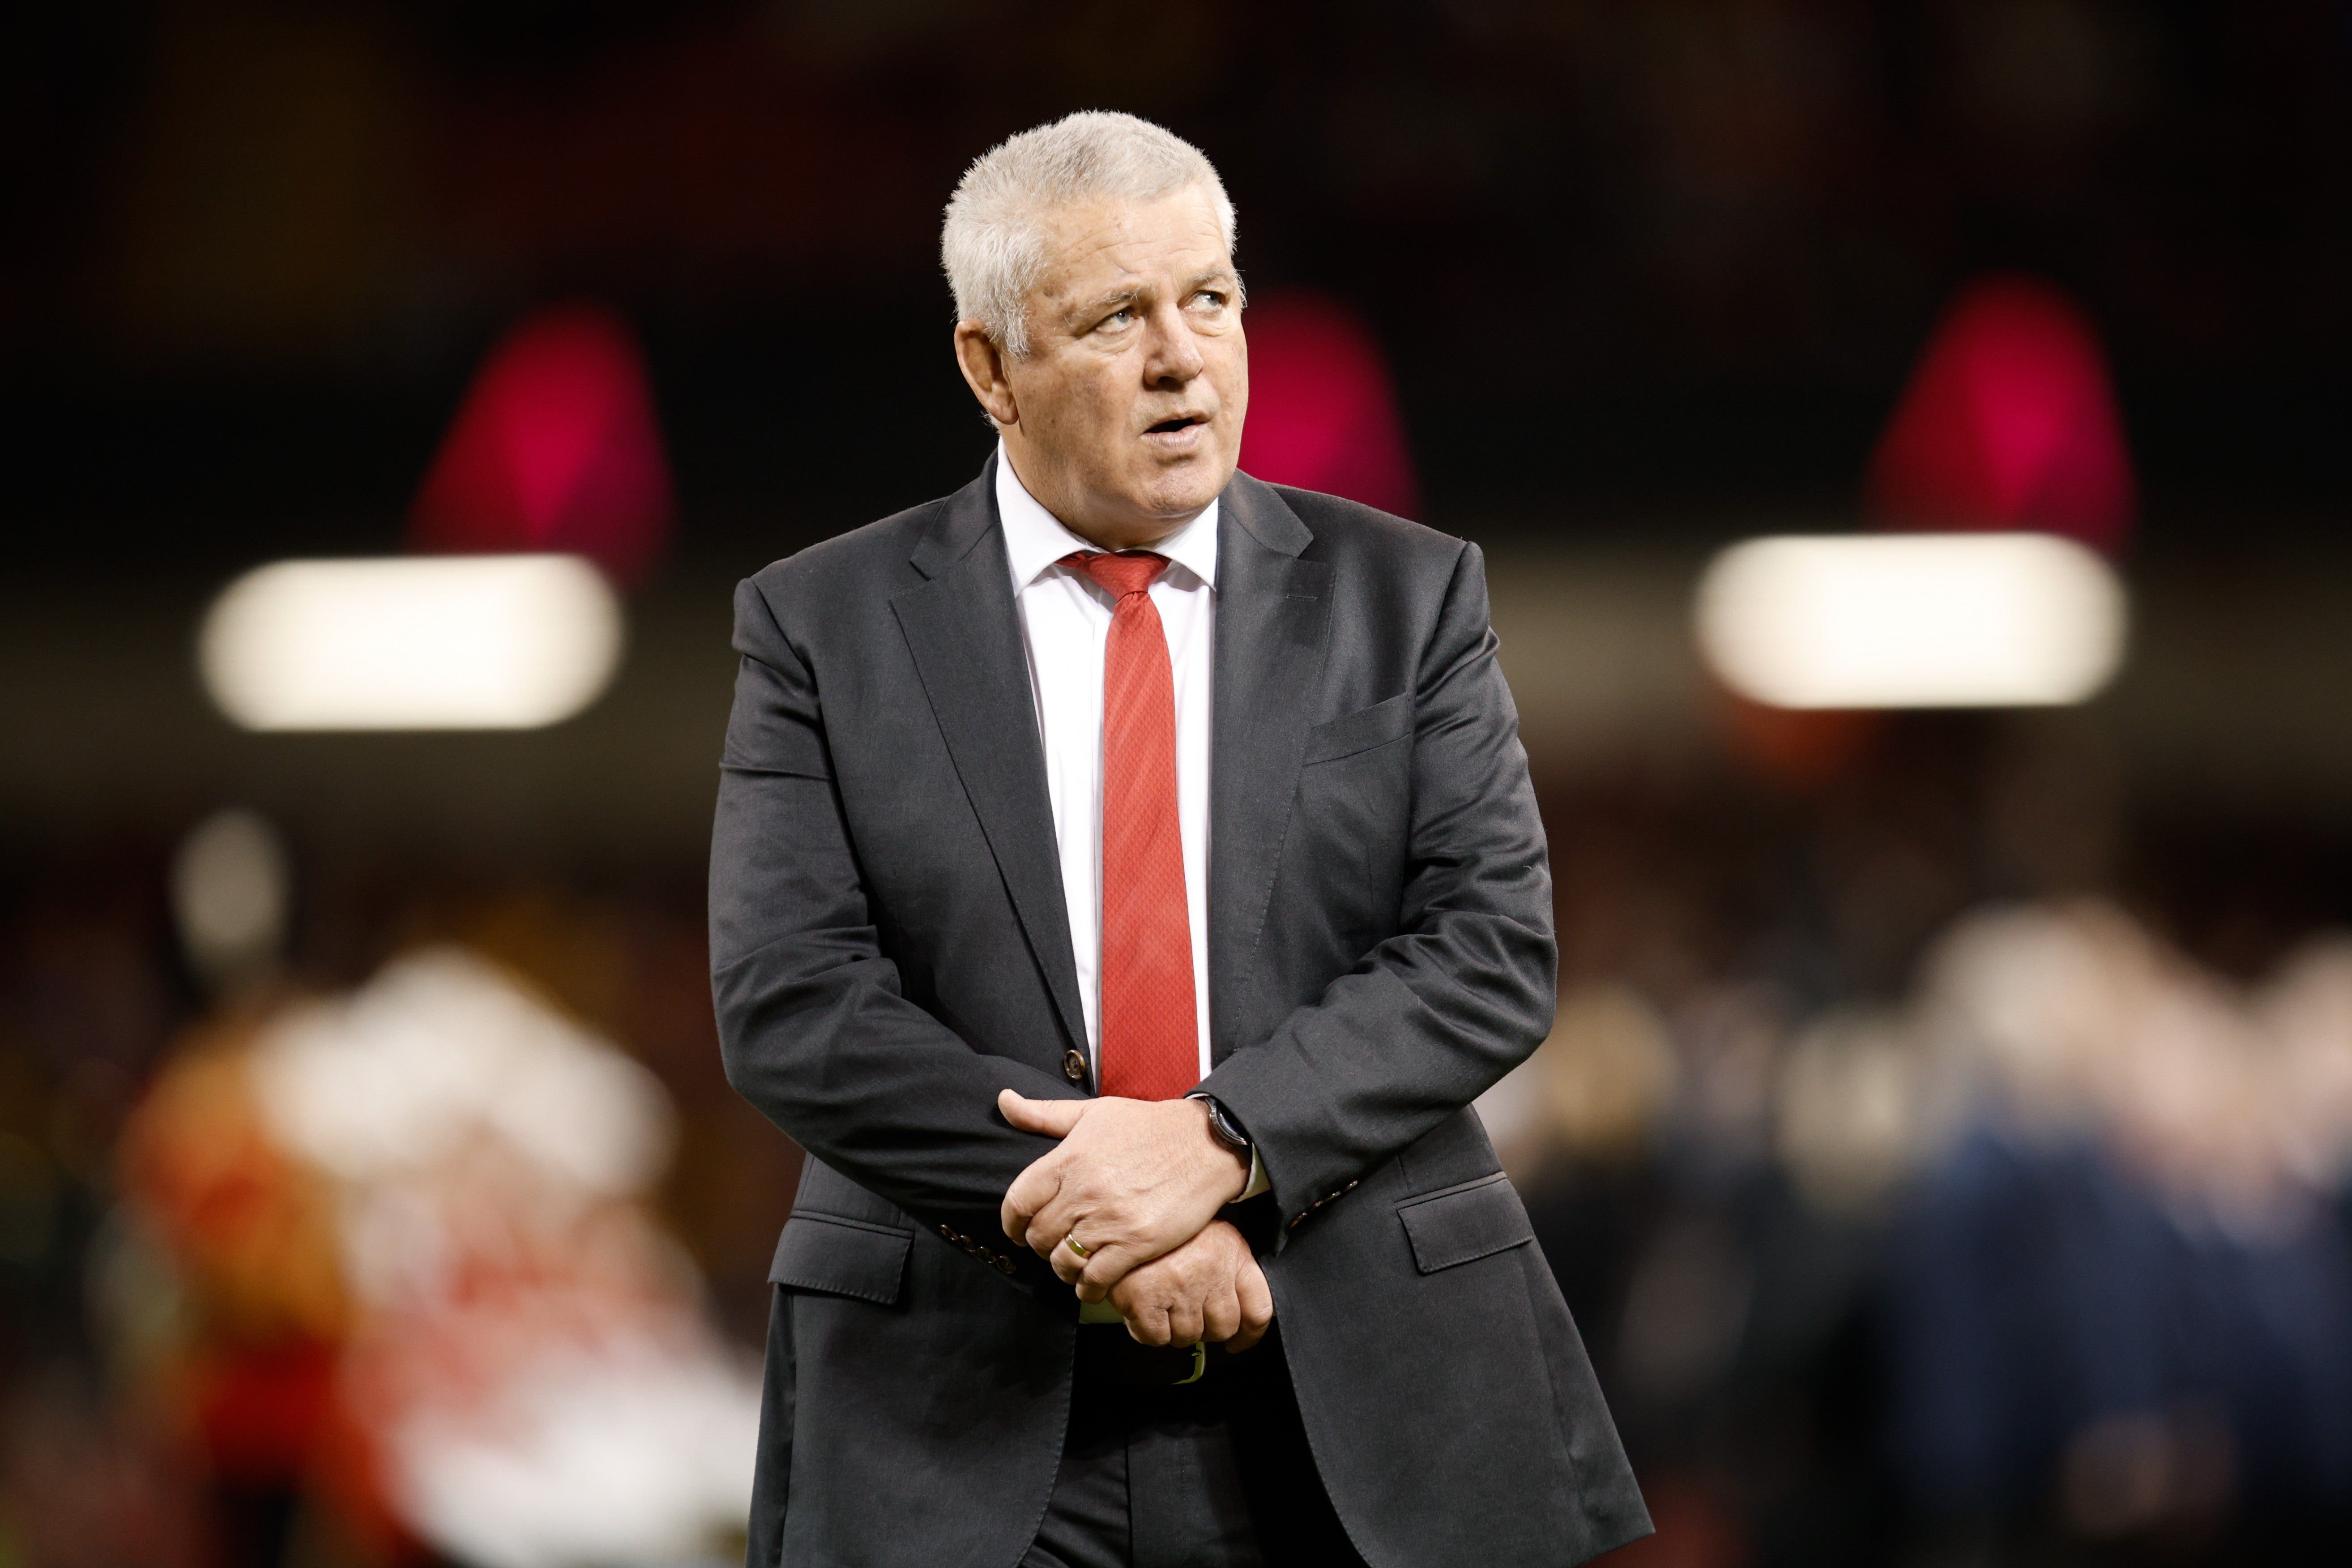 Warren Gatland offered to resign after Wales’s loss